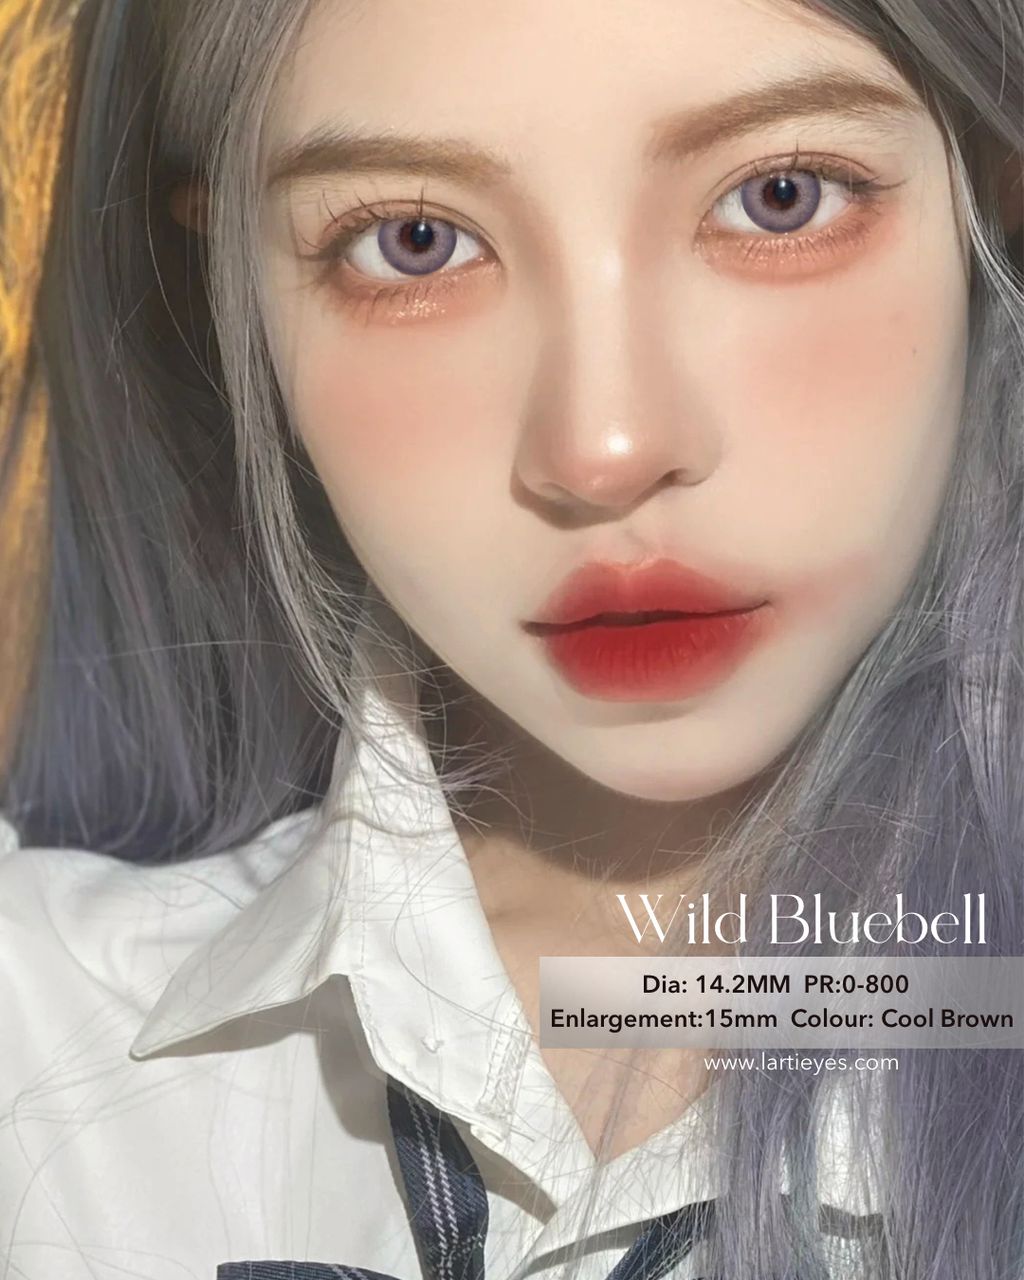 Wild Bluebell Cool Brown model 1